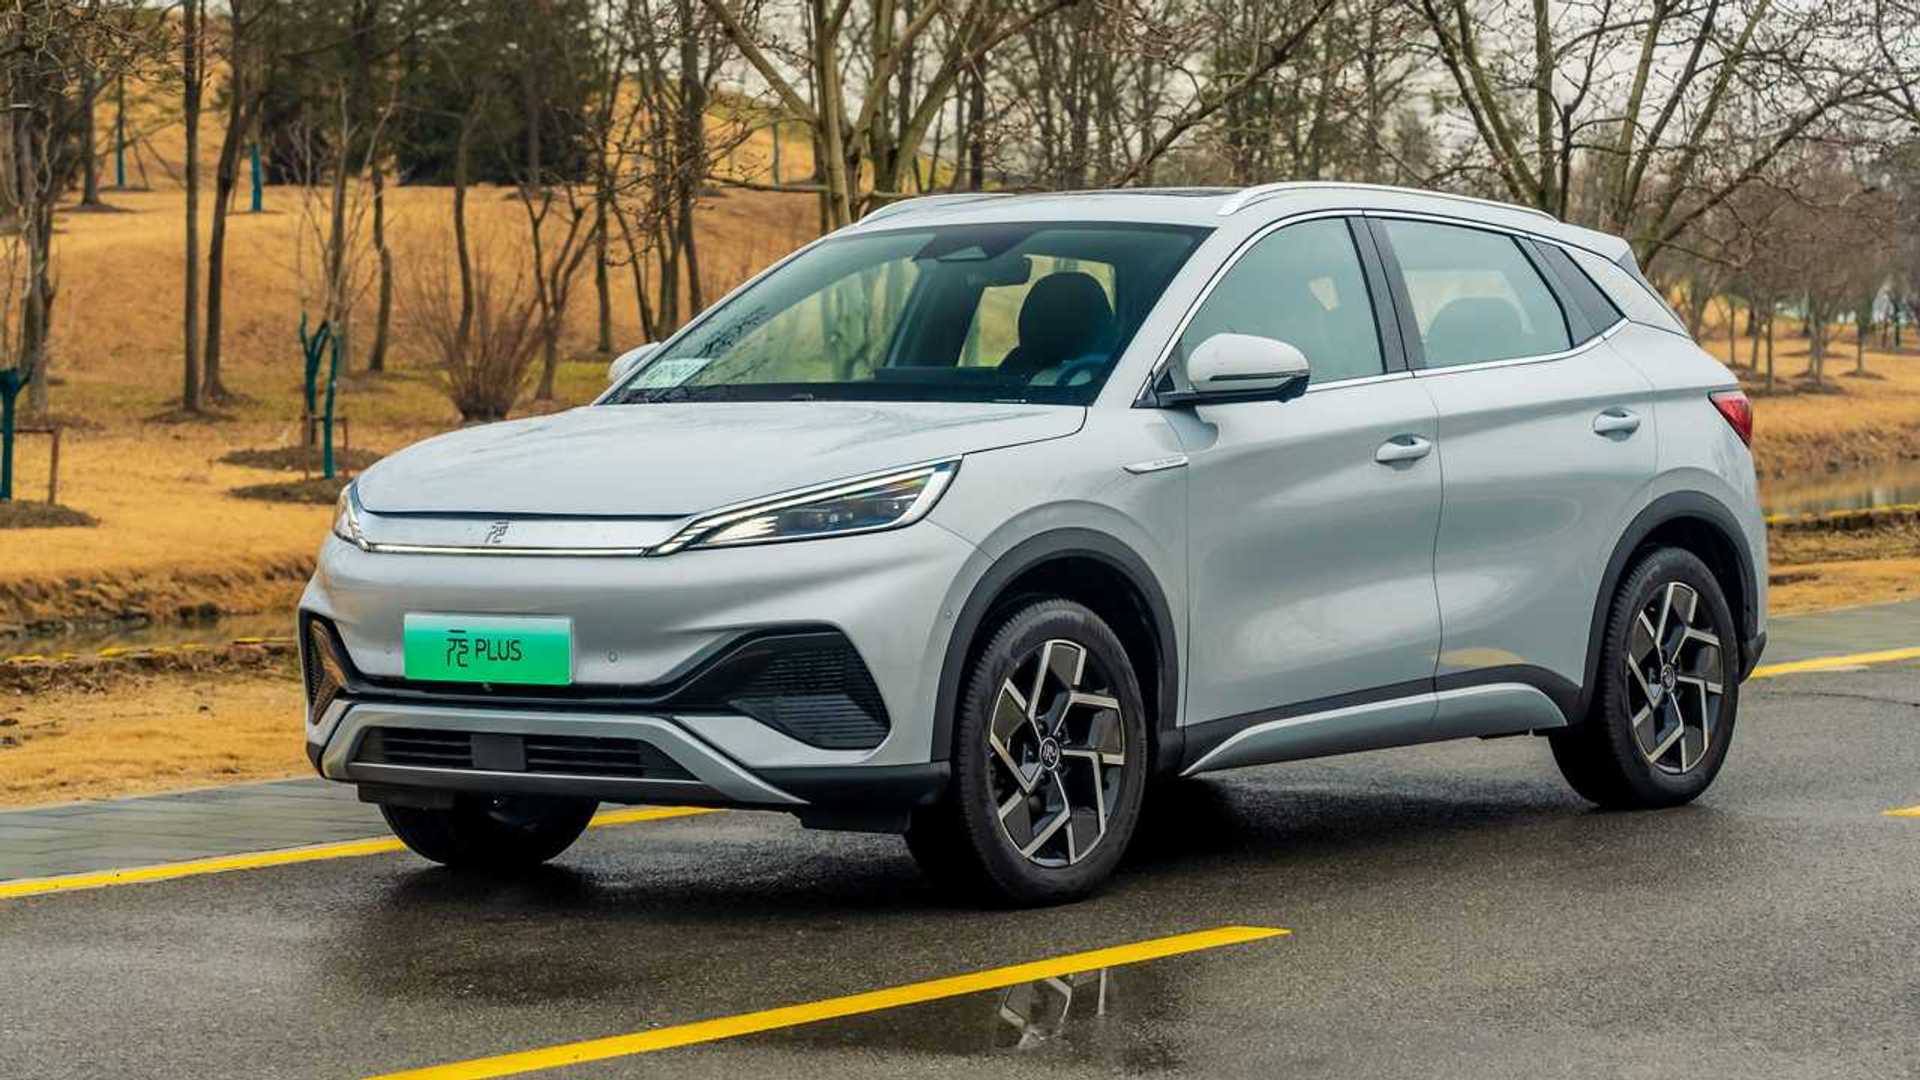 affordable chinese evs boost adoption rates in asia, south america: report